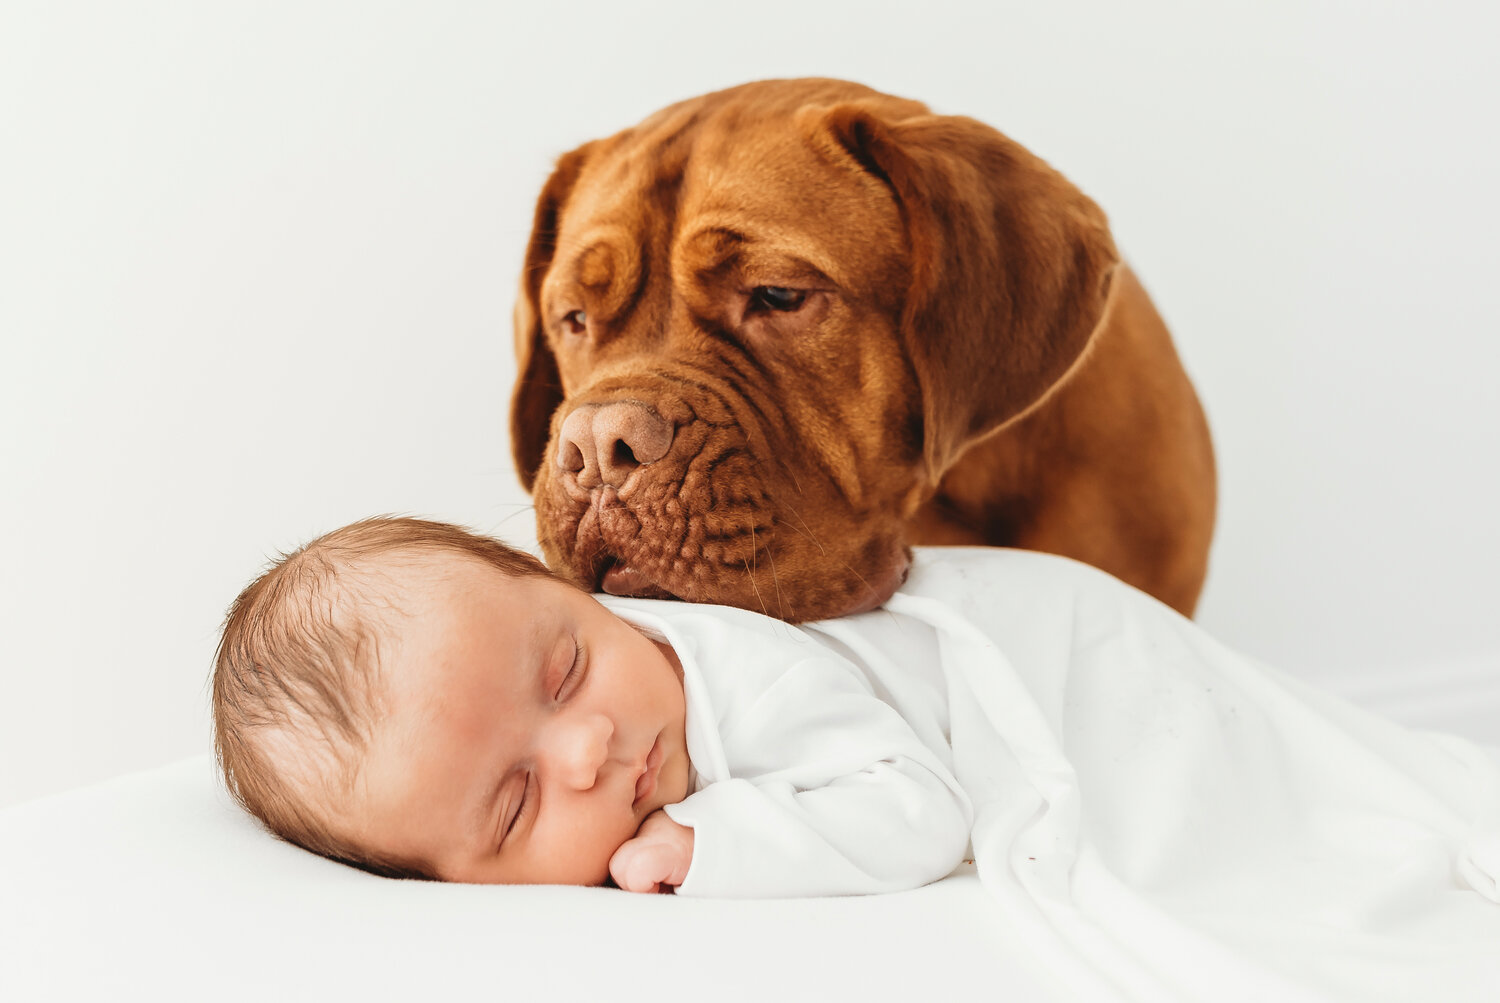 Pet Meets Baby workshops help ease the transition for all